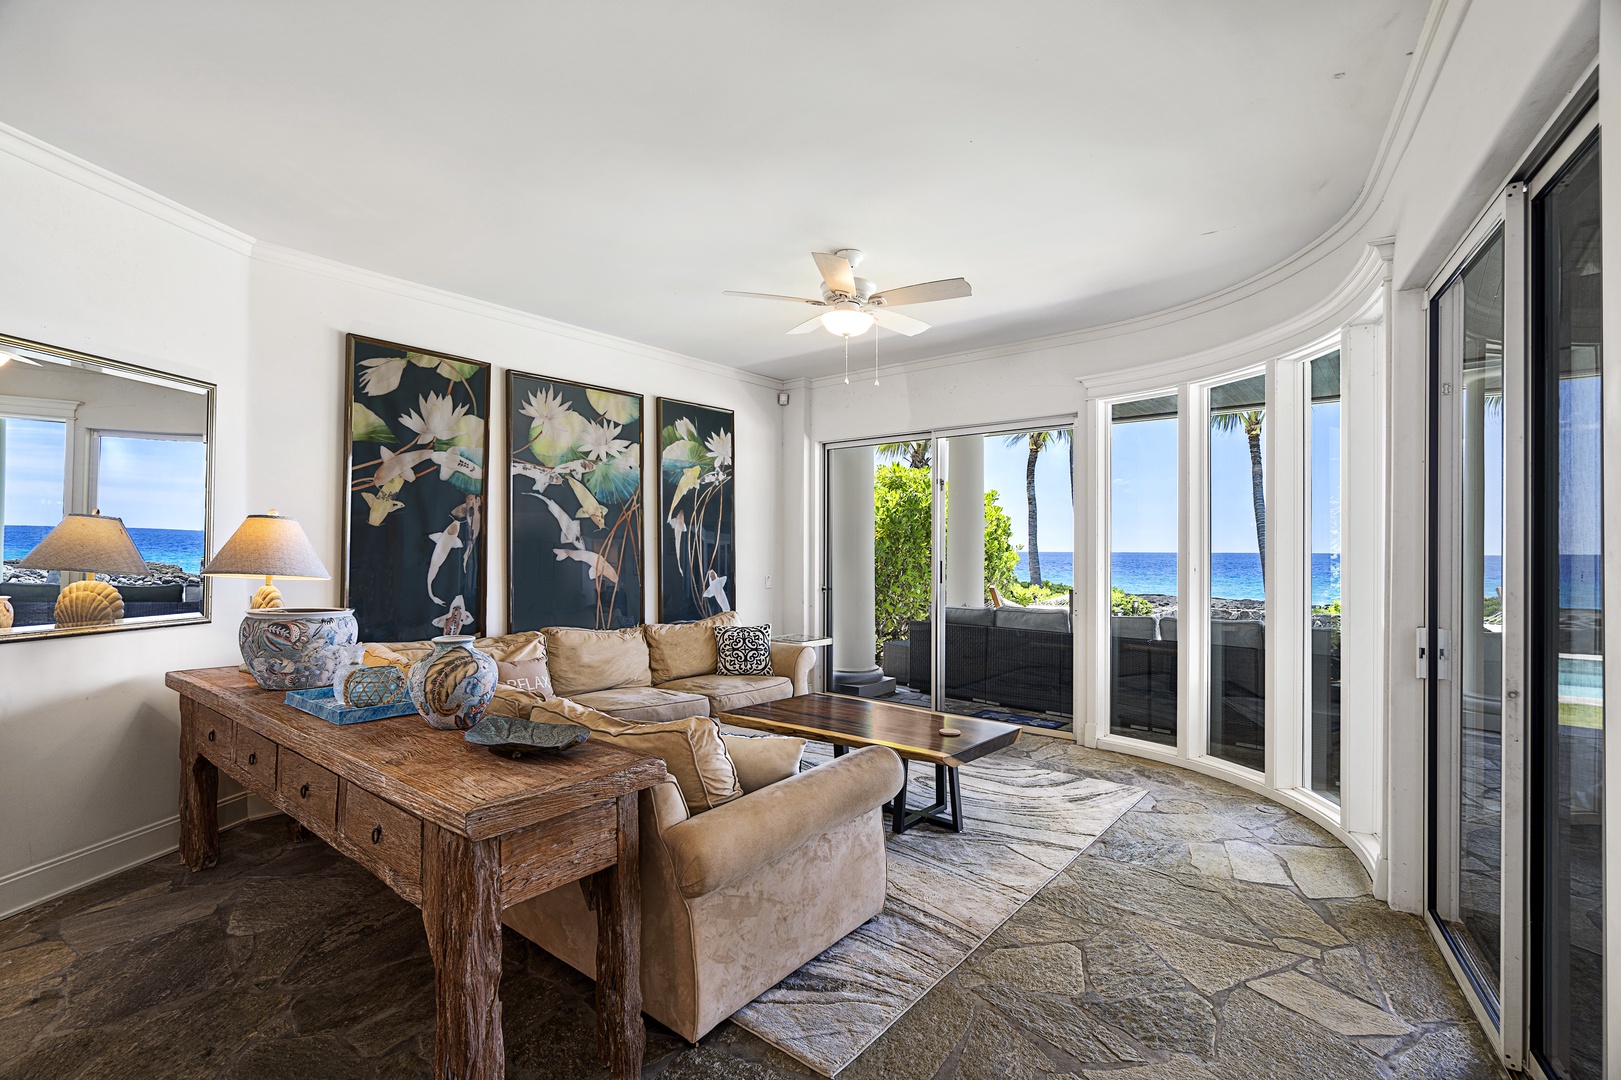 Kailua Kona Vacation Rentals, Kona Blue - Sectional couch to enjoy the open air climate and ocean views